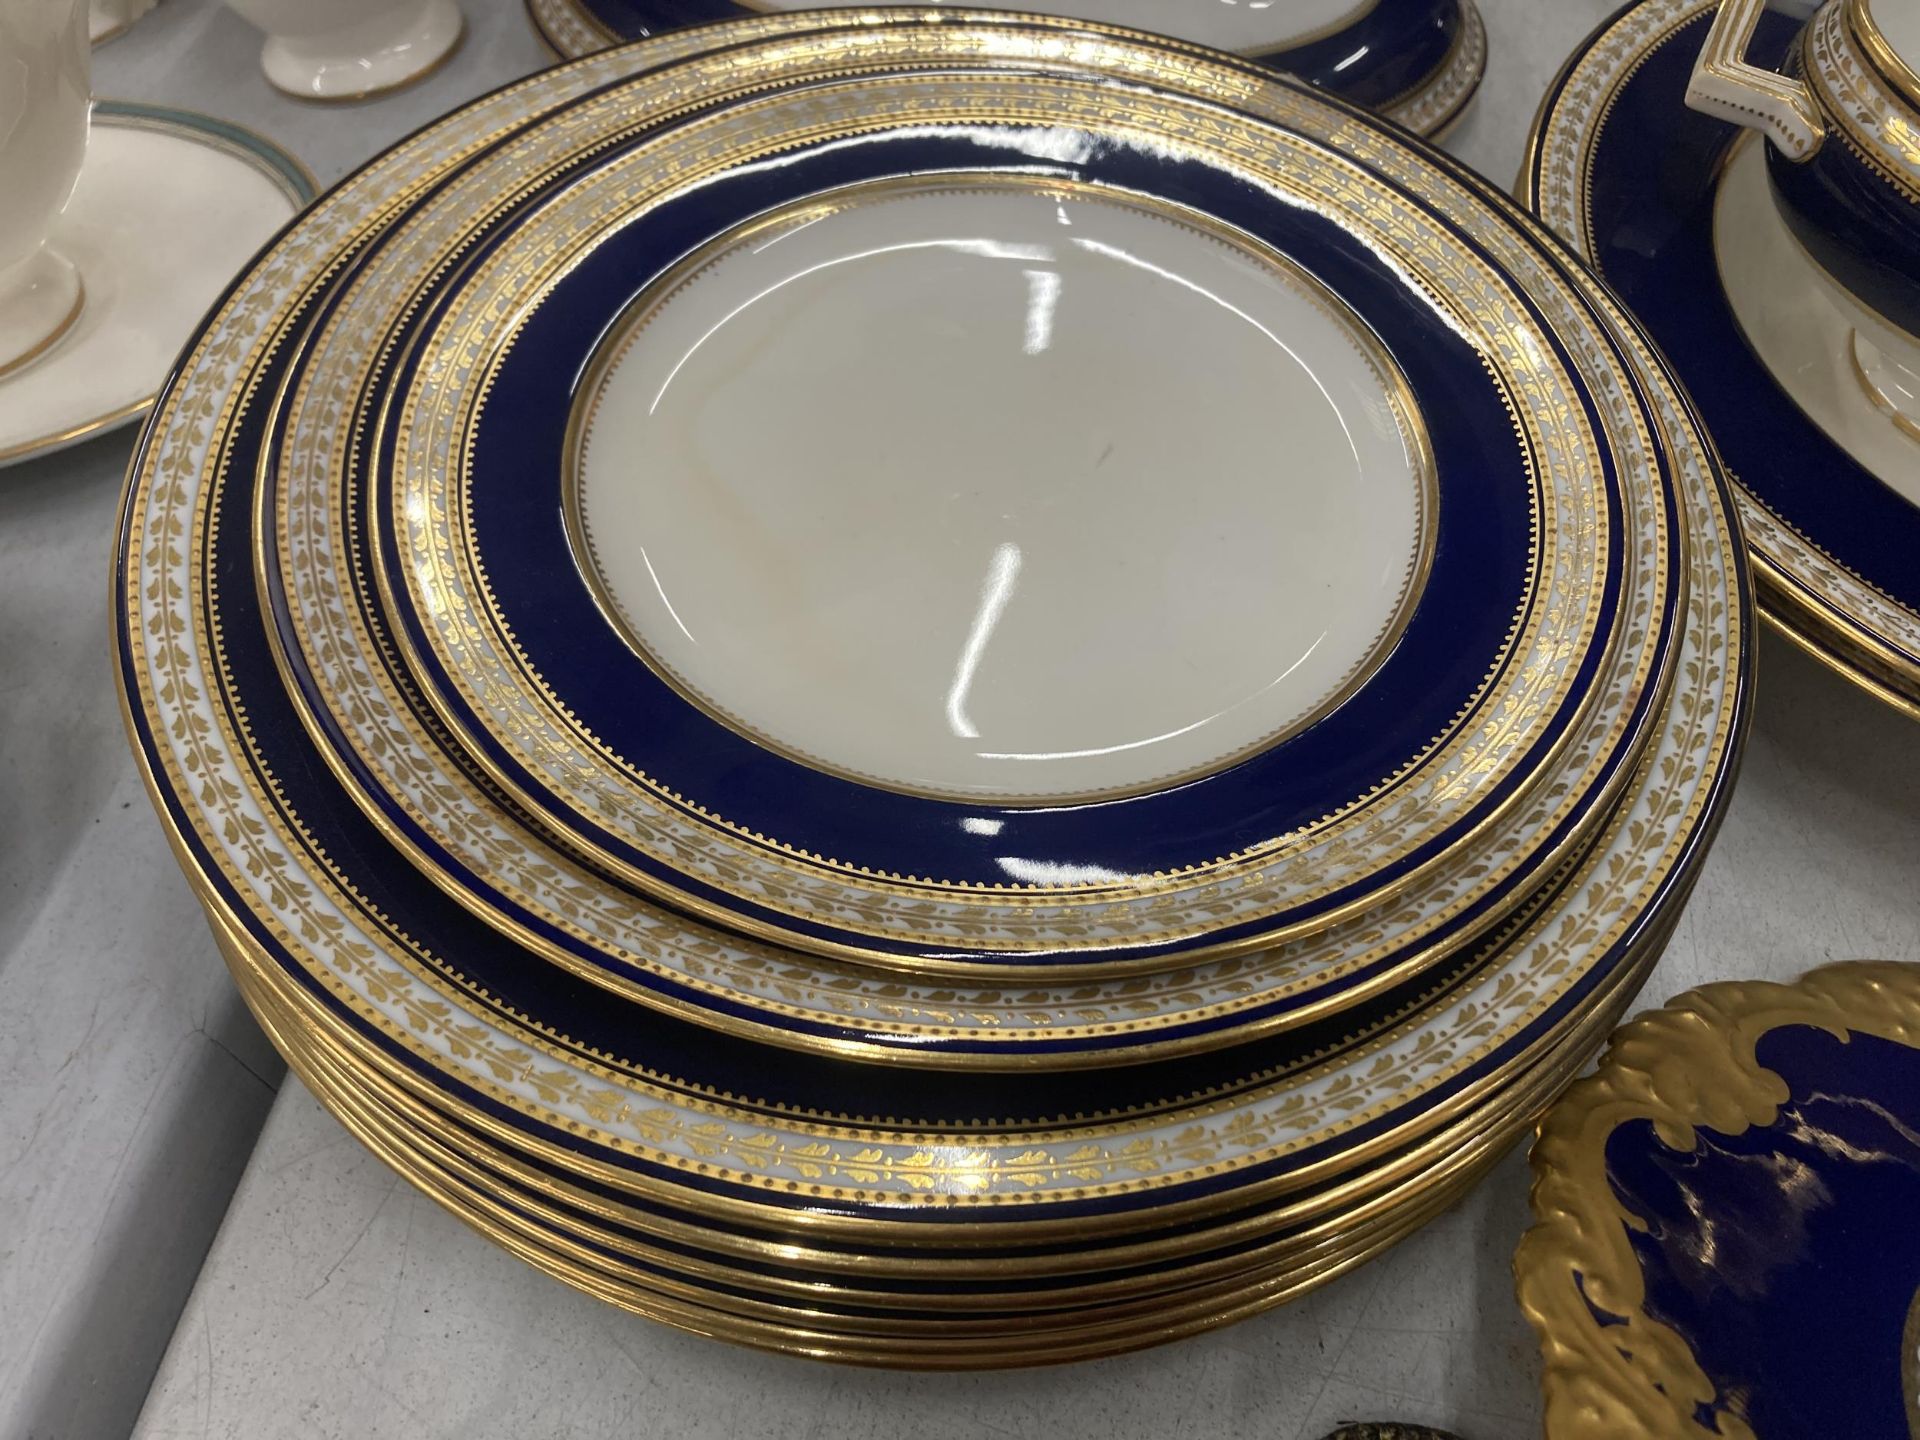 A QUANTITY OF COPELAND SPODE PLATES PLUS SEVING BOWLS IN BLUE WITH GILDED DECORATION - Image 2 of 3